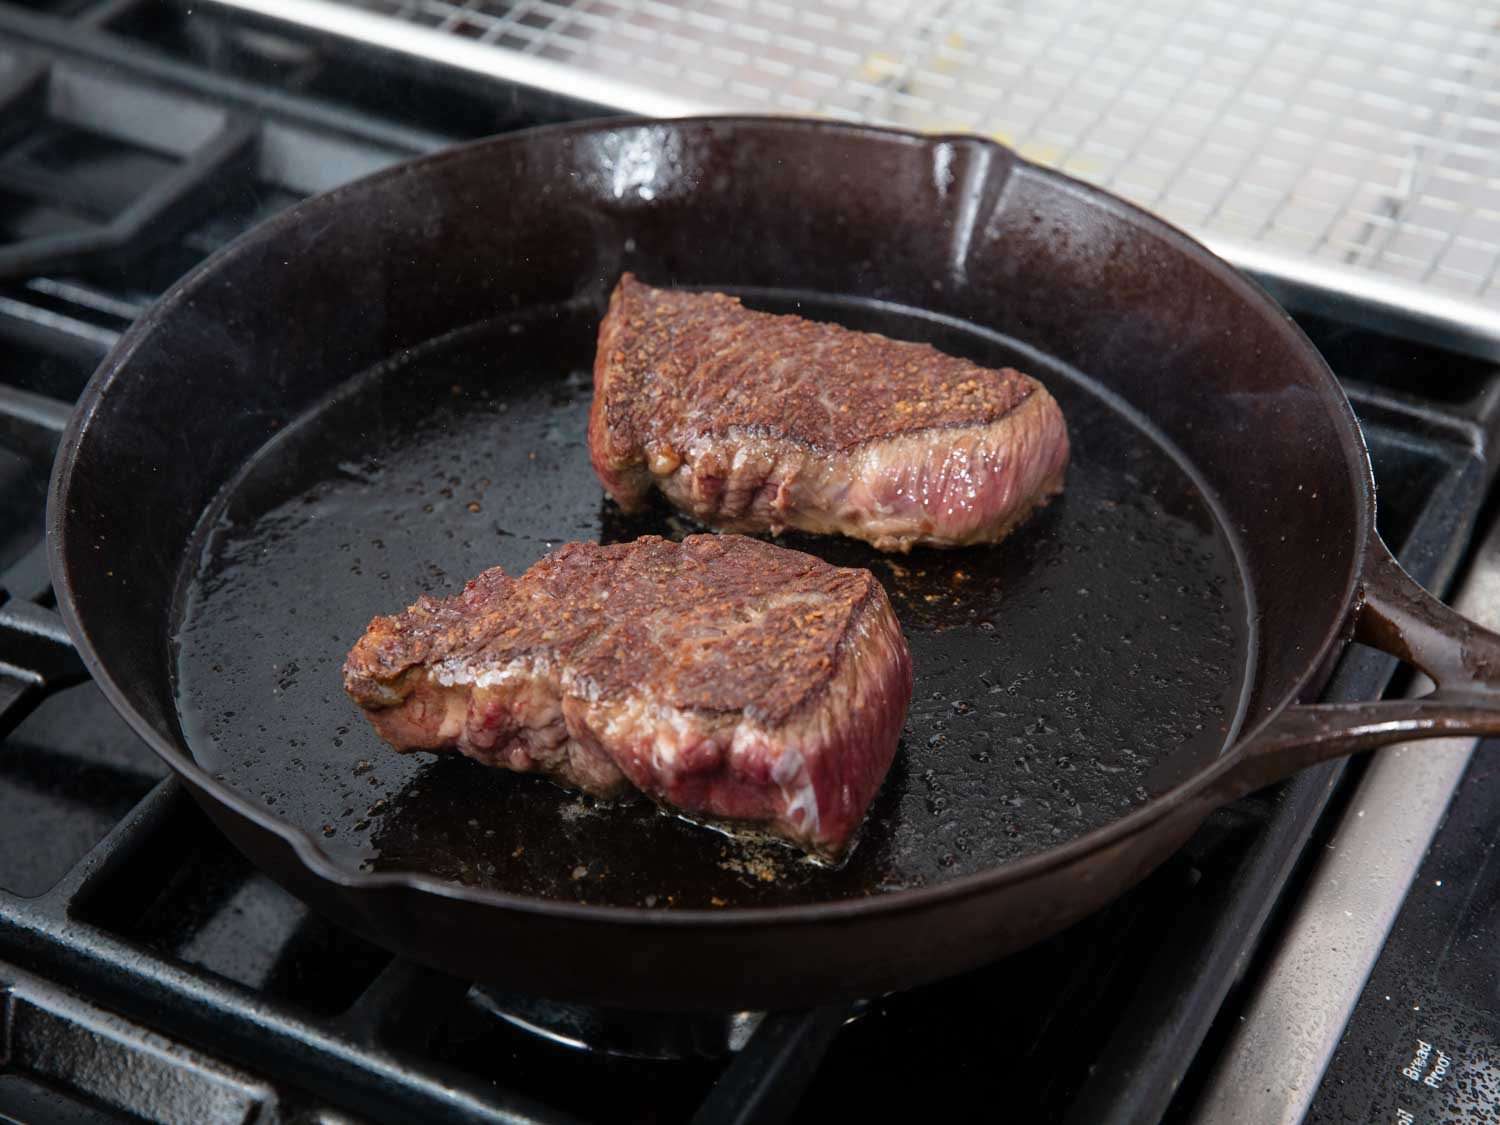 Searing short rib steaks in a cast iron skillet. Just about every skillet, when preheated throughly, managed to put a great sear on both sides of the meat.